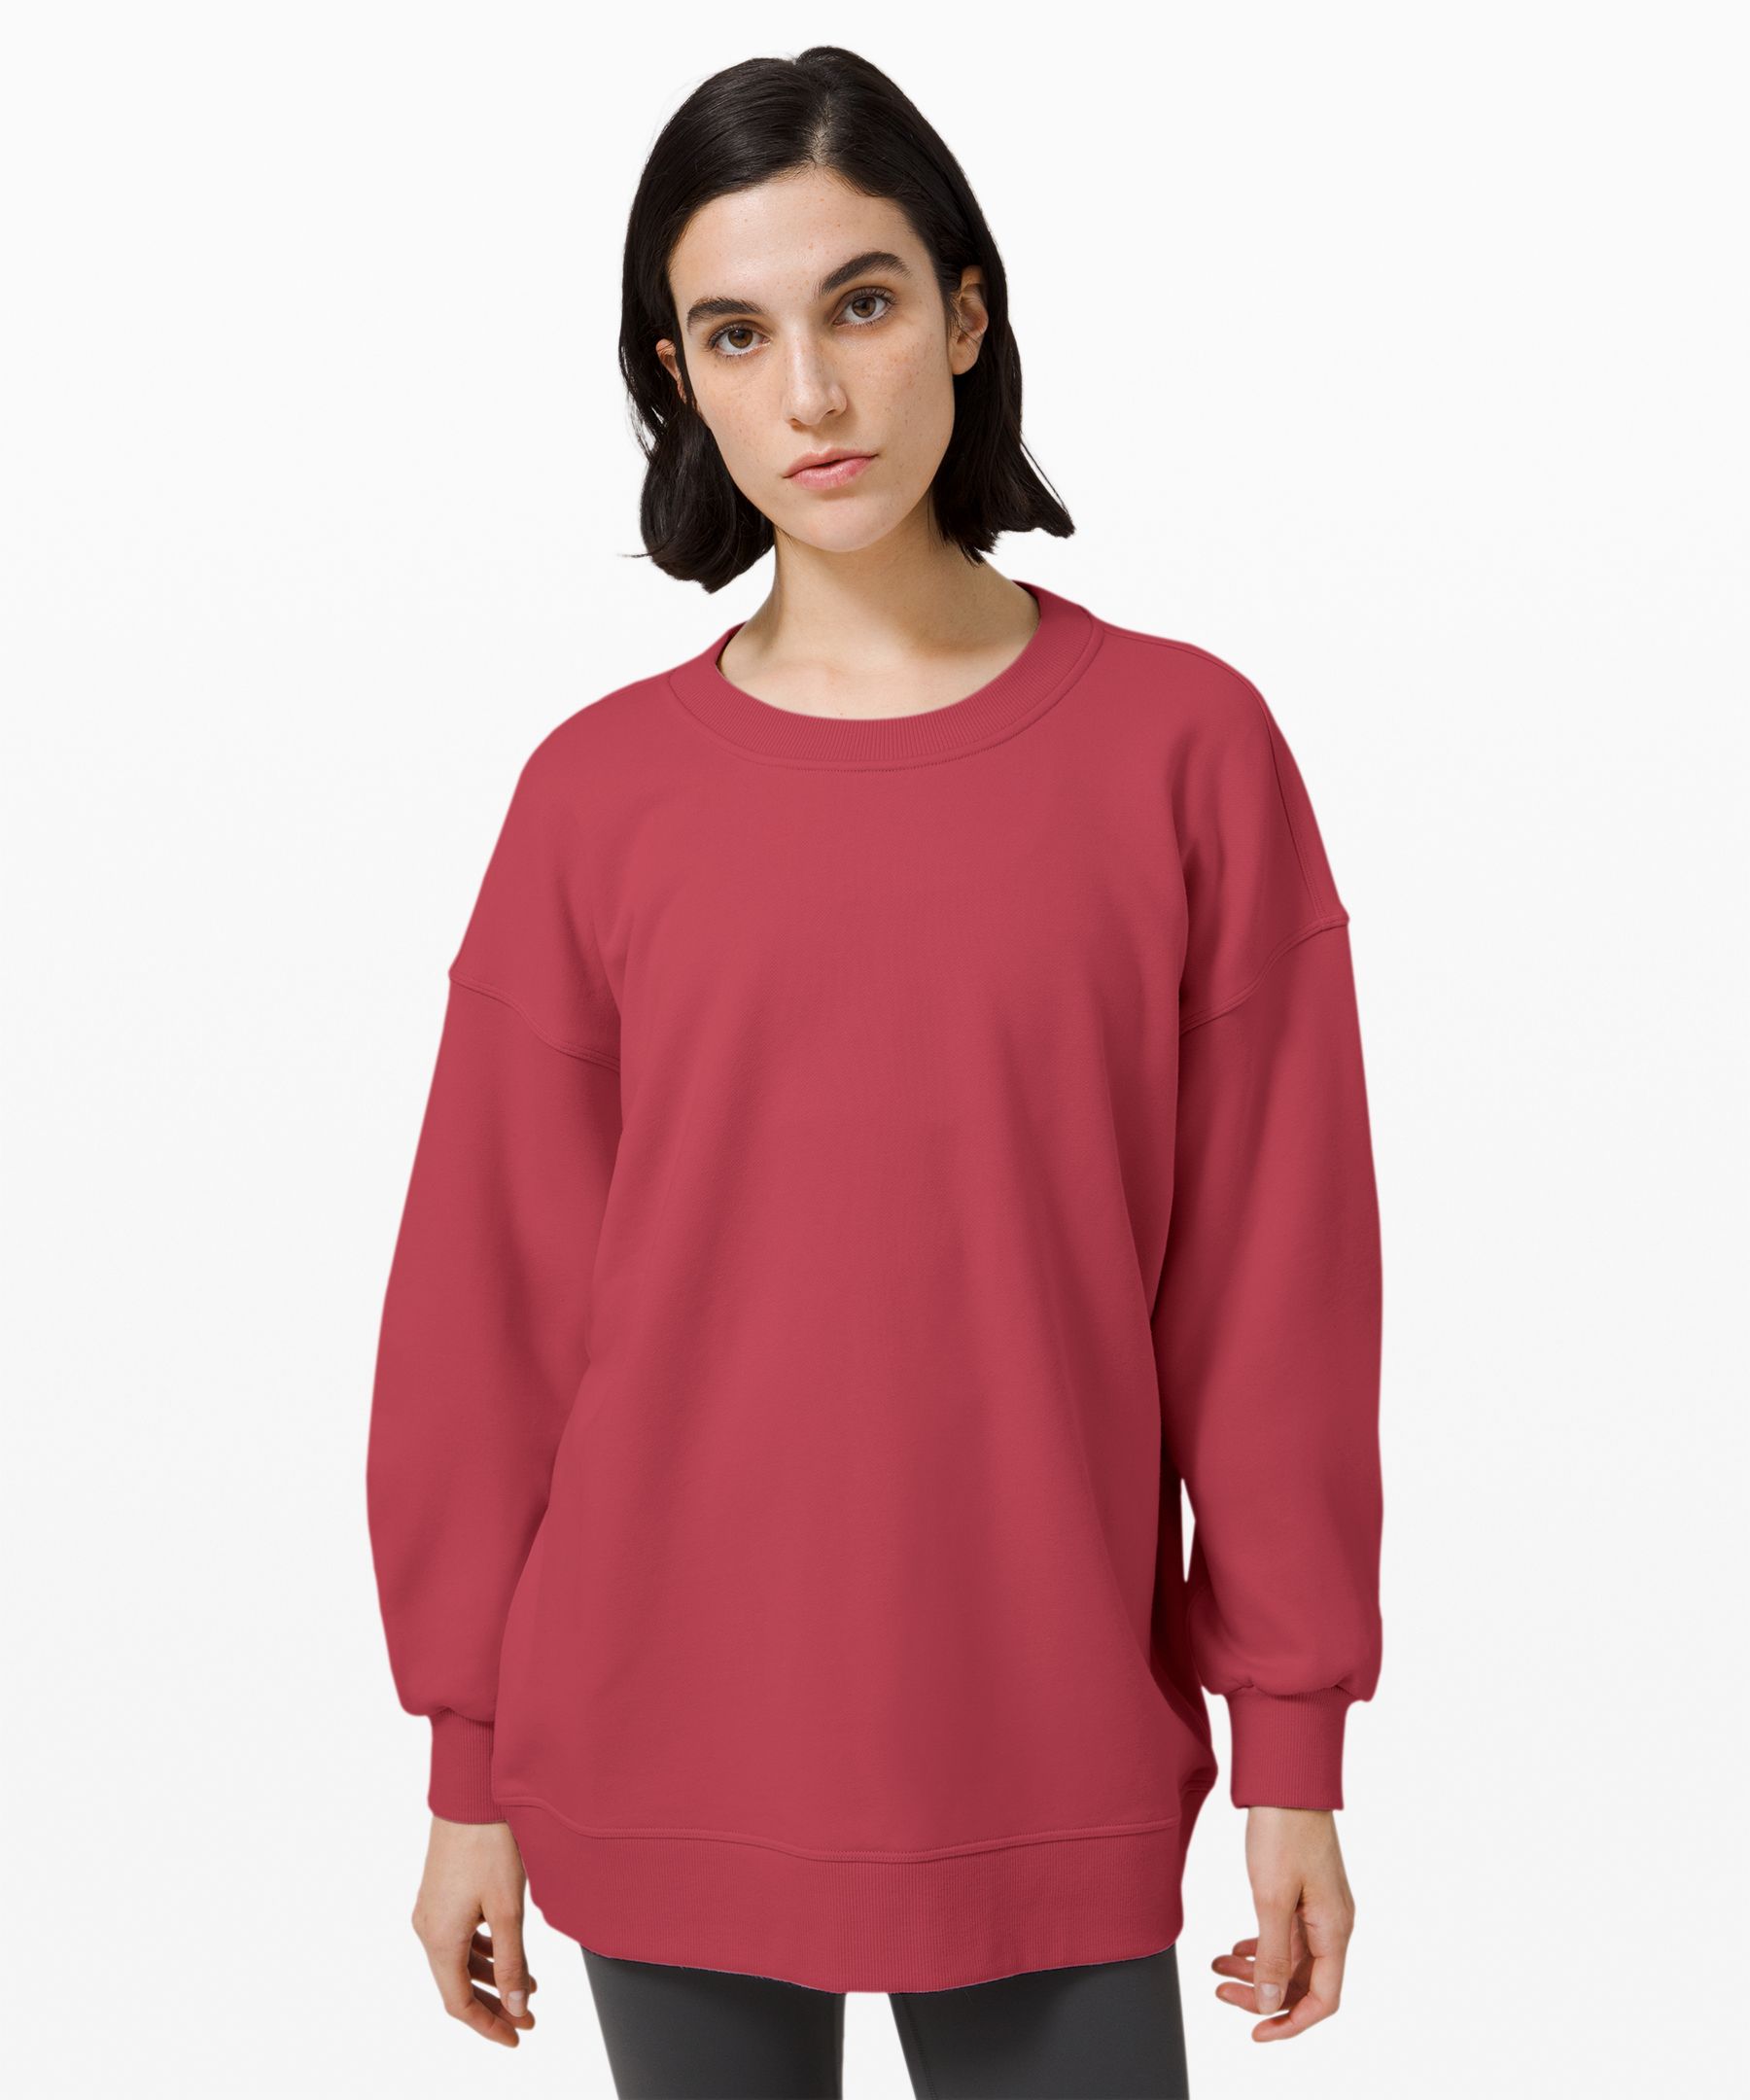 Lululemon Perfectly Oversized Crew In Red